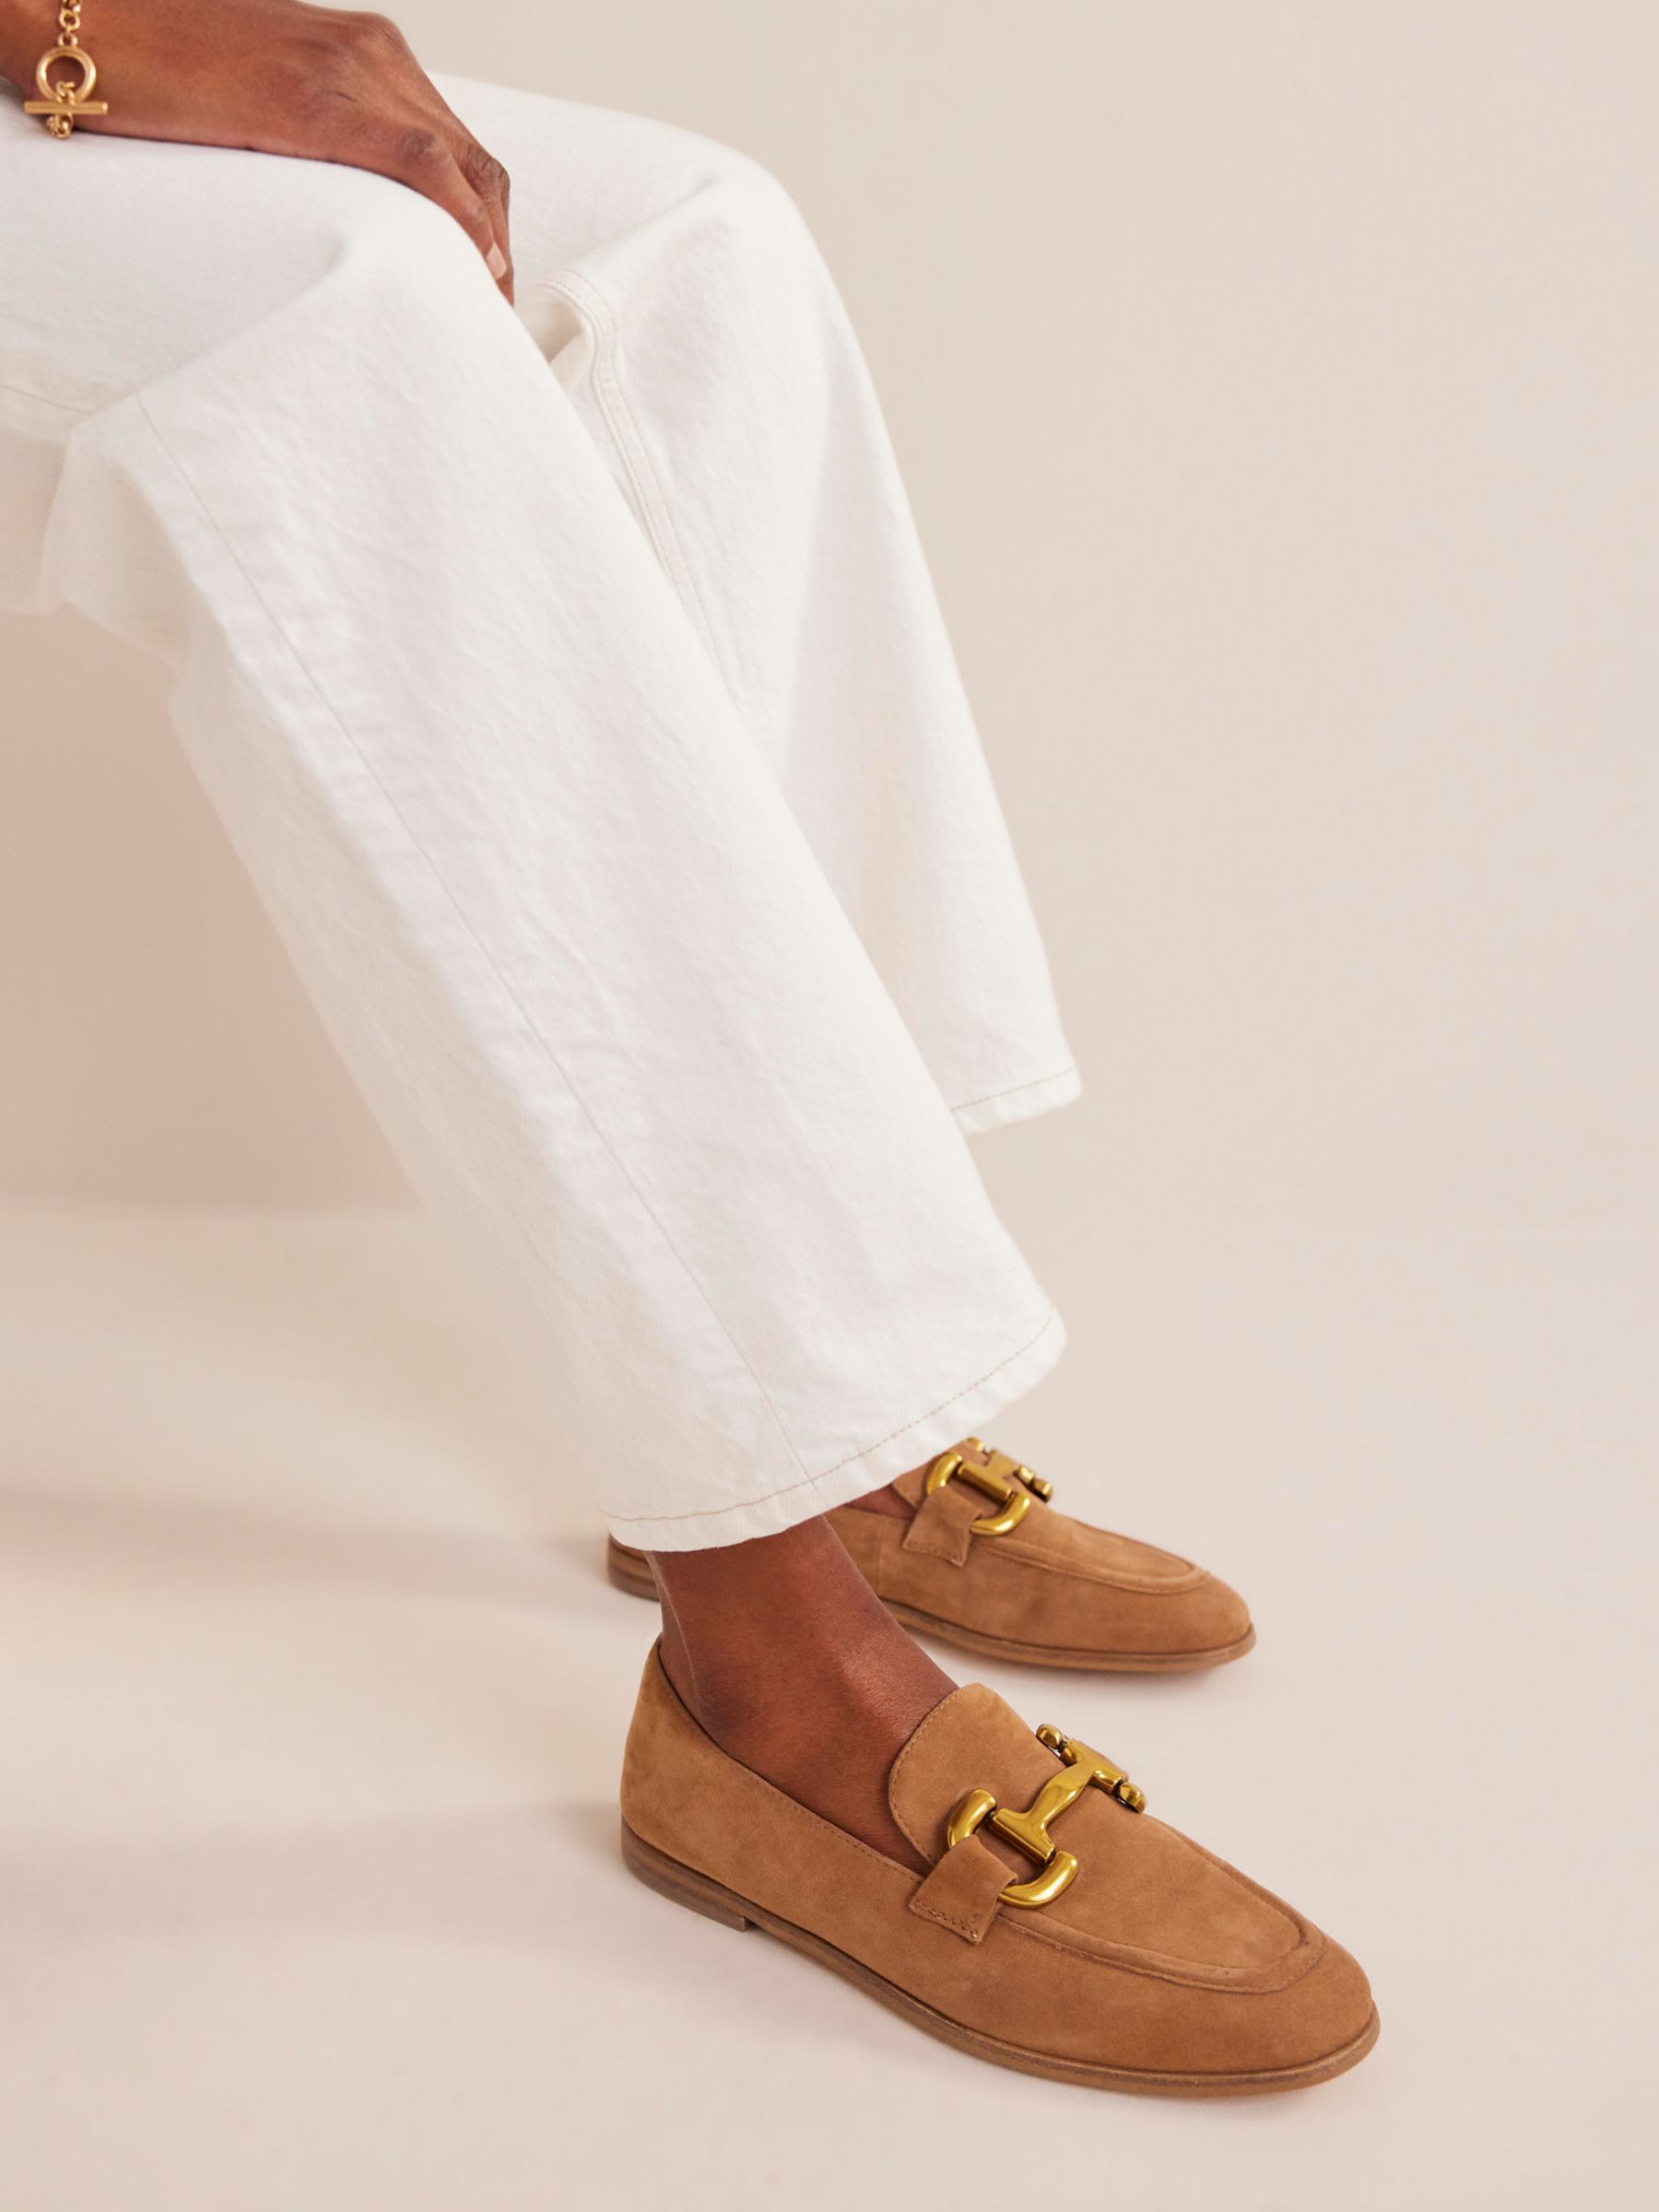 Boden Iris Snaffle Suede Loafers, Ginger Snap at John Lewis & Partners